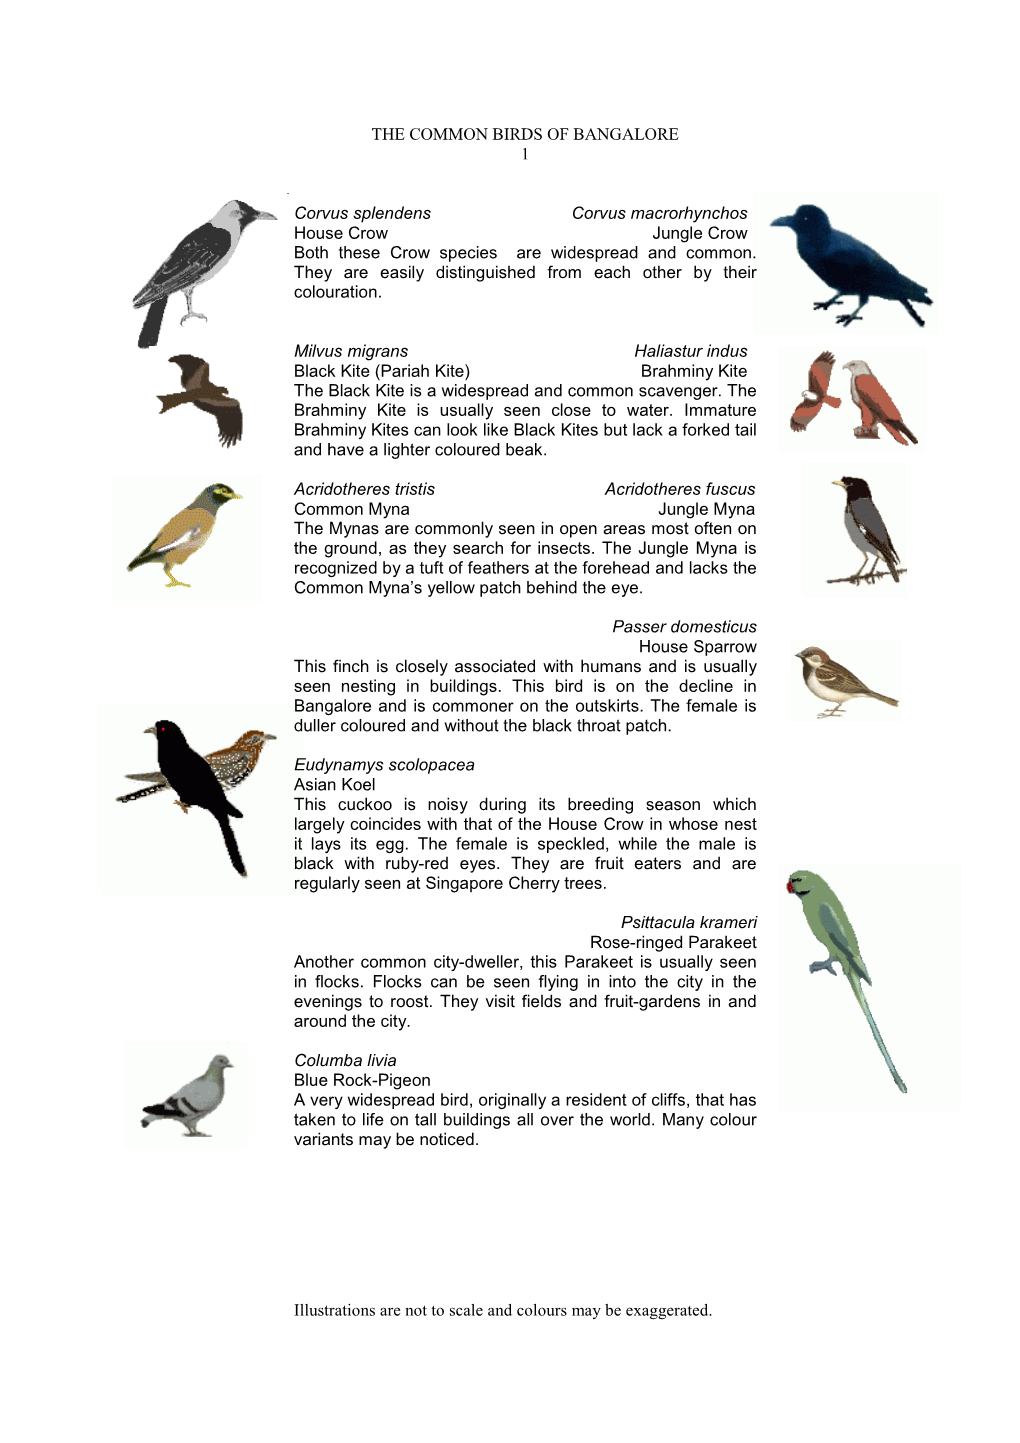 THE COMMON BIRDS of BANGALORE 1 Illustrations Are Not